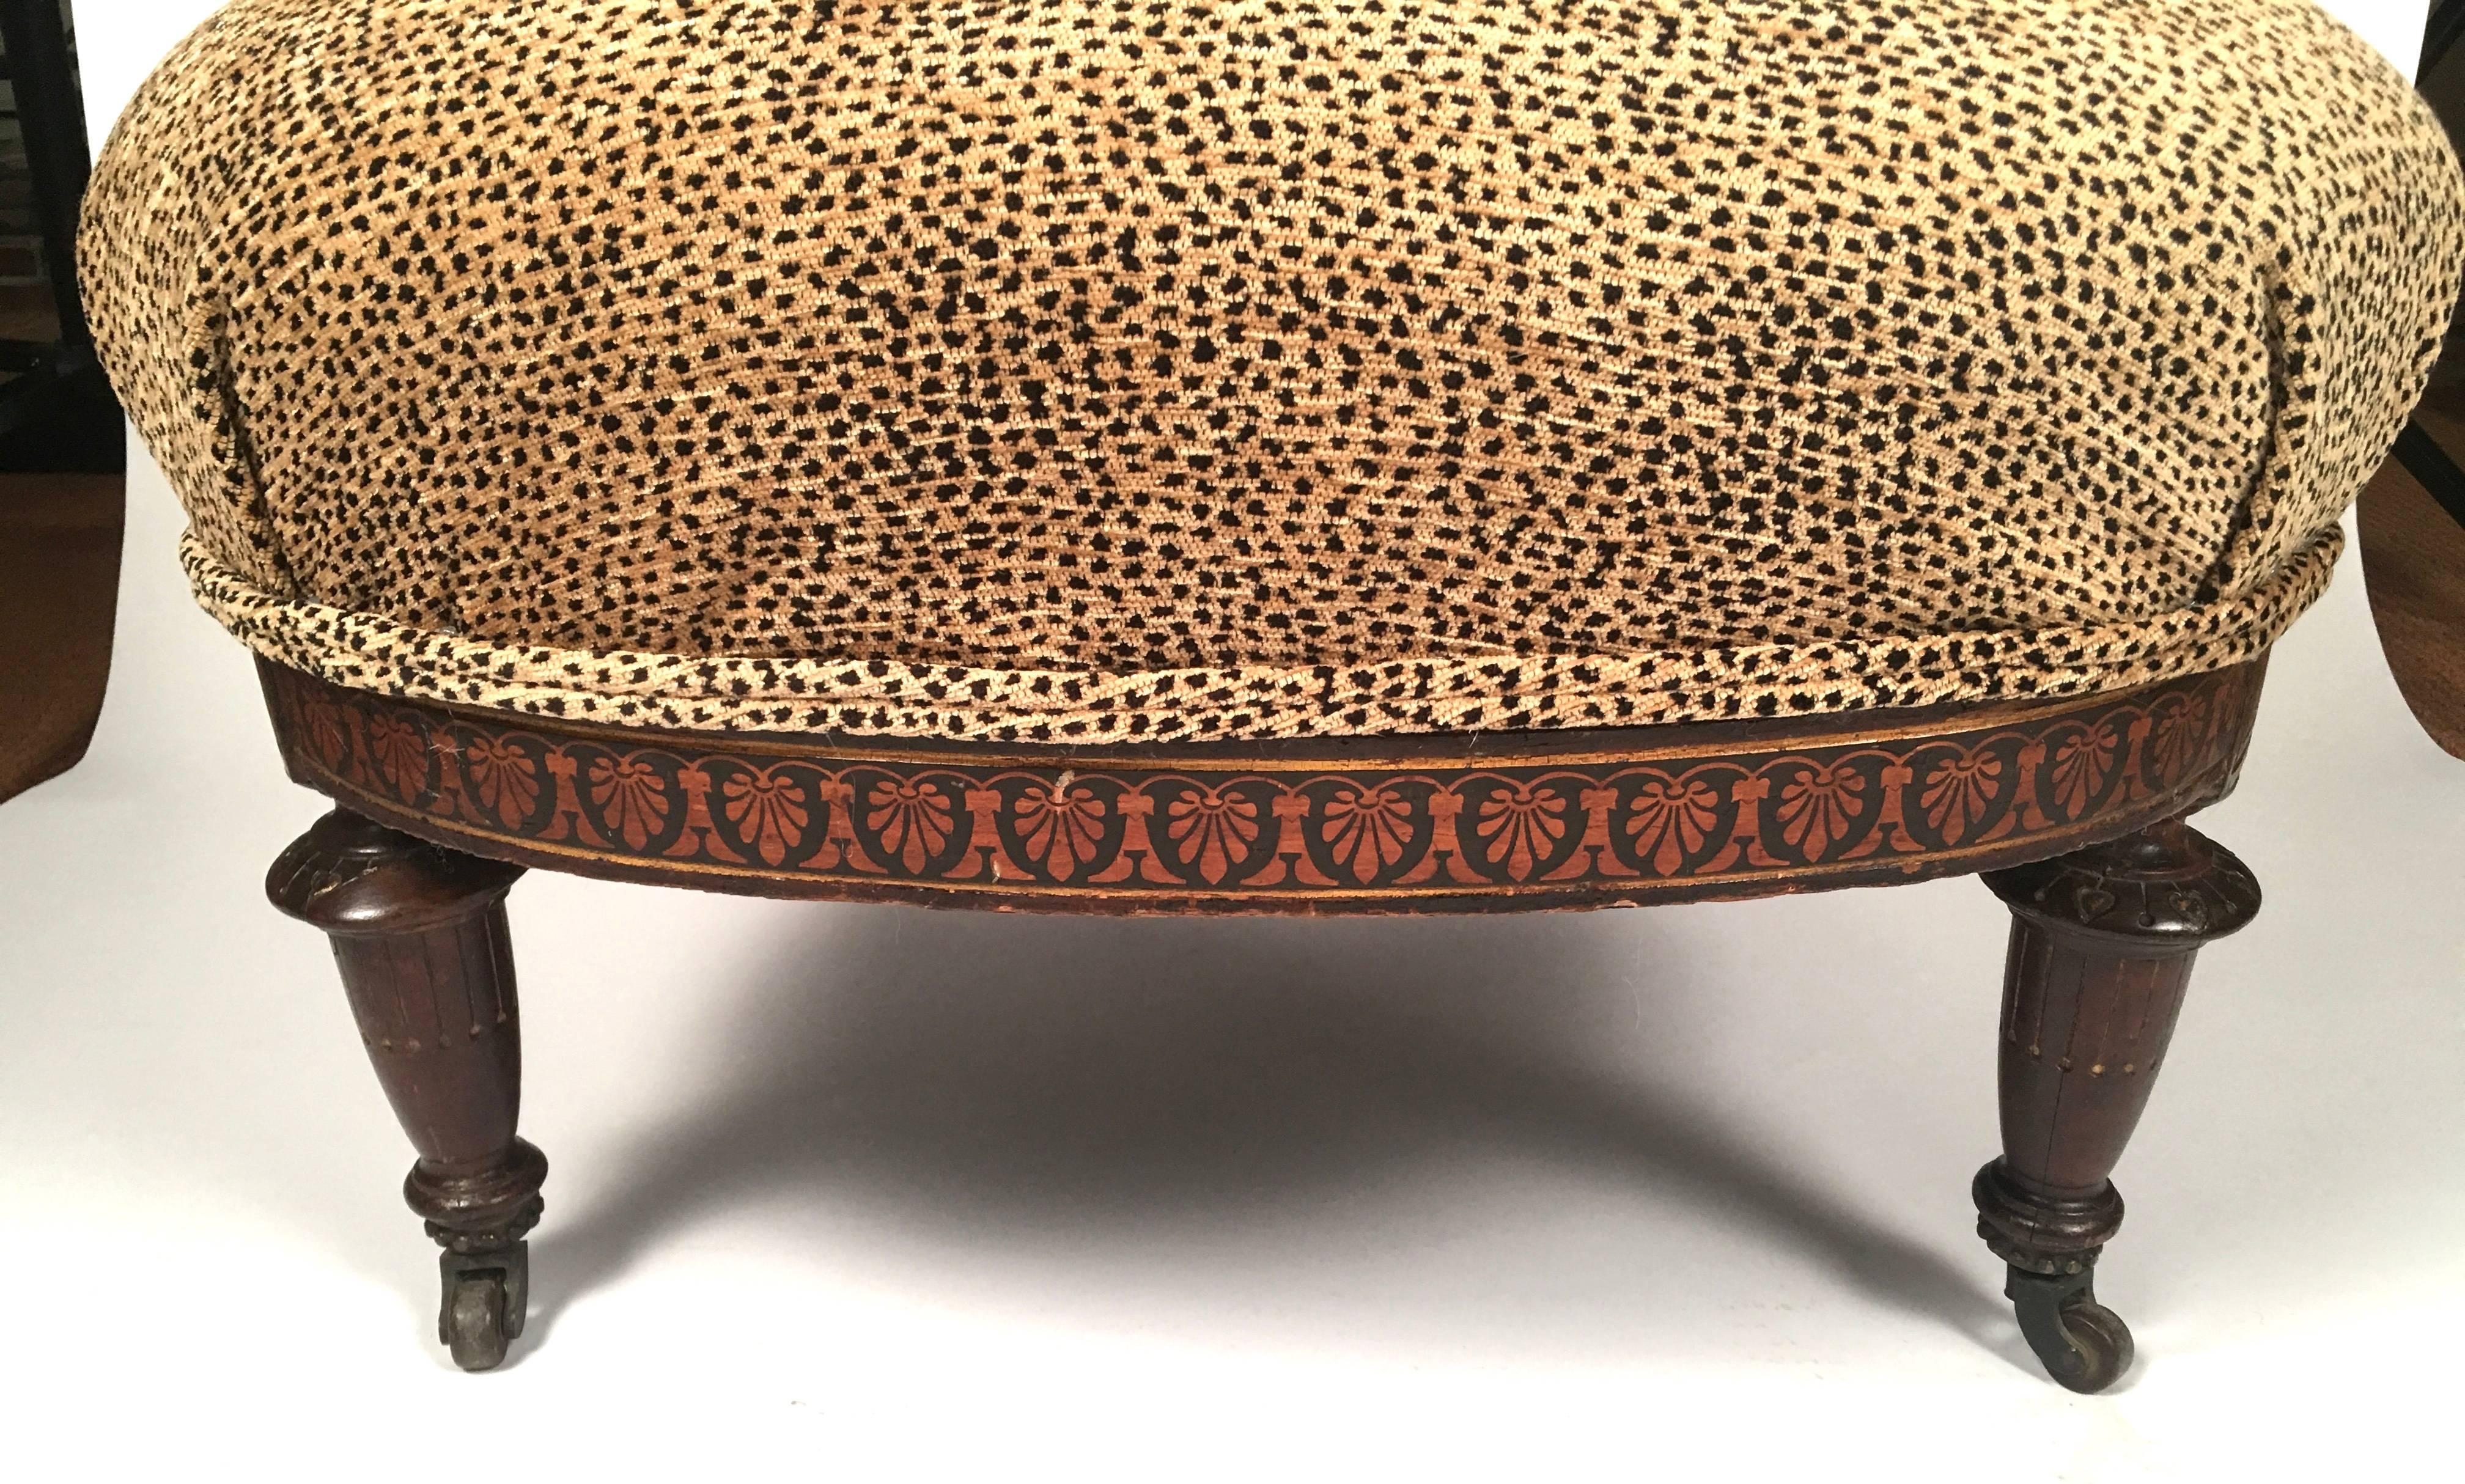 Carved Neoclassical 19th Century Slipper Chair with Leopard Velvet Upholstery